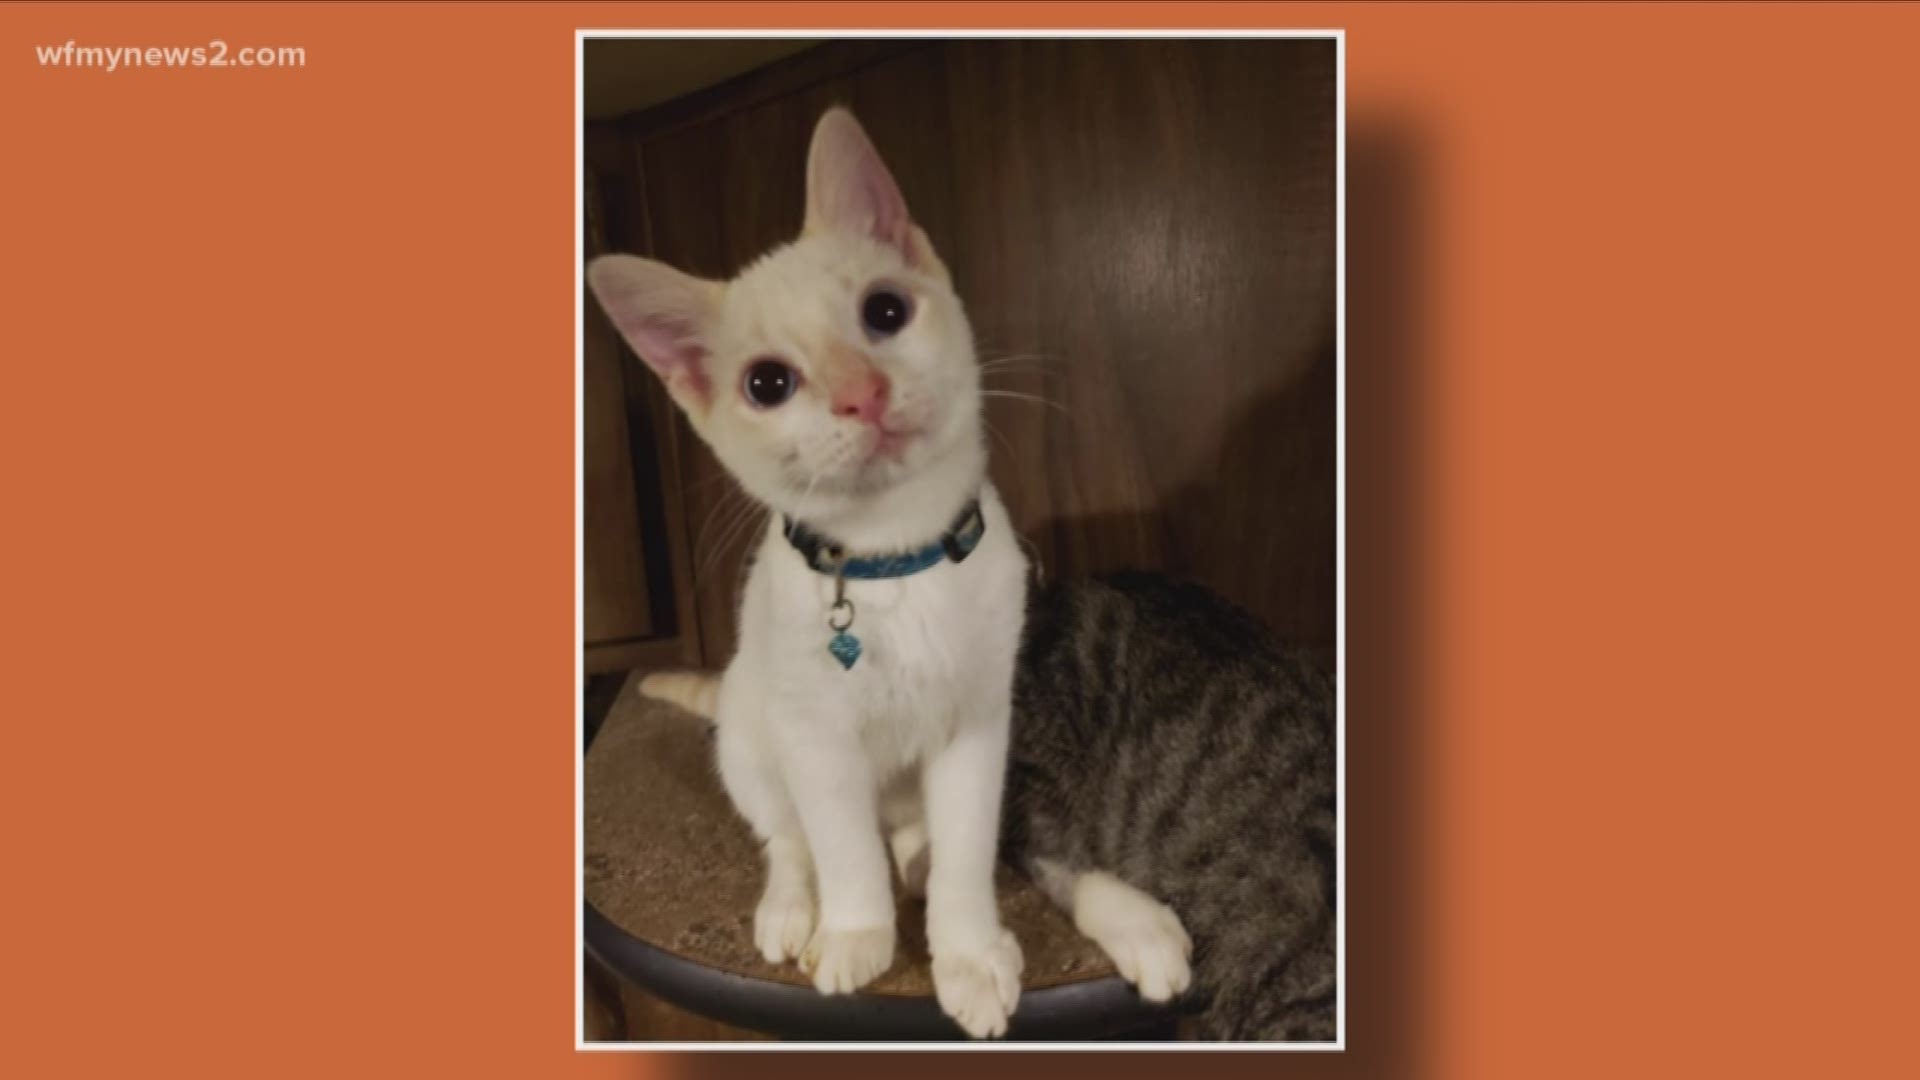 This sweet baby from the Animal Awareness Society is ready to be the newest member of your family.